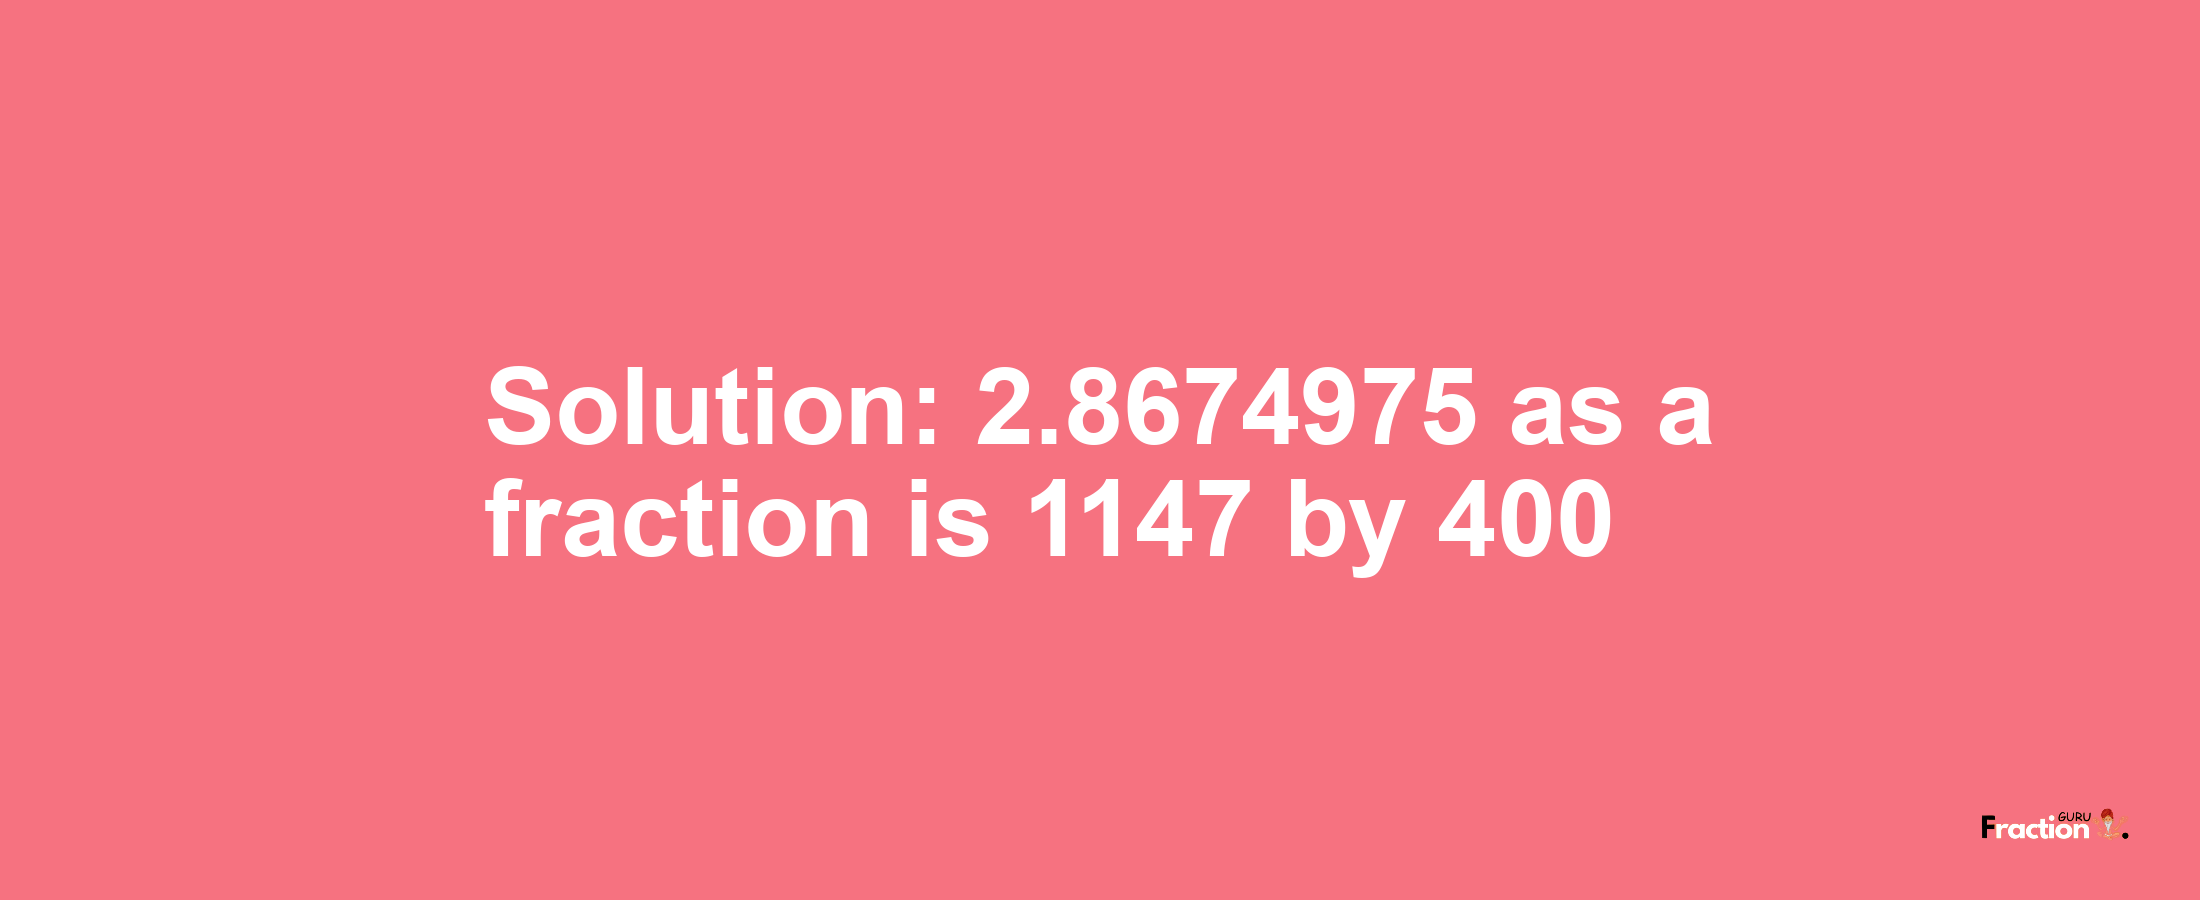 Solution:2.8674975 as a fraction is 1147/400